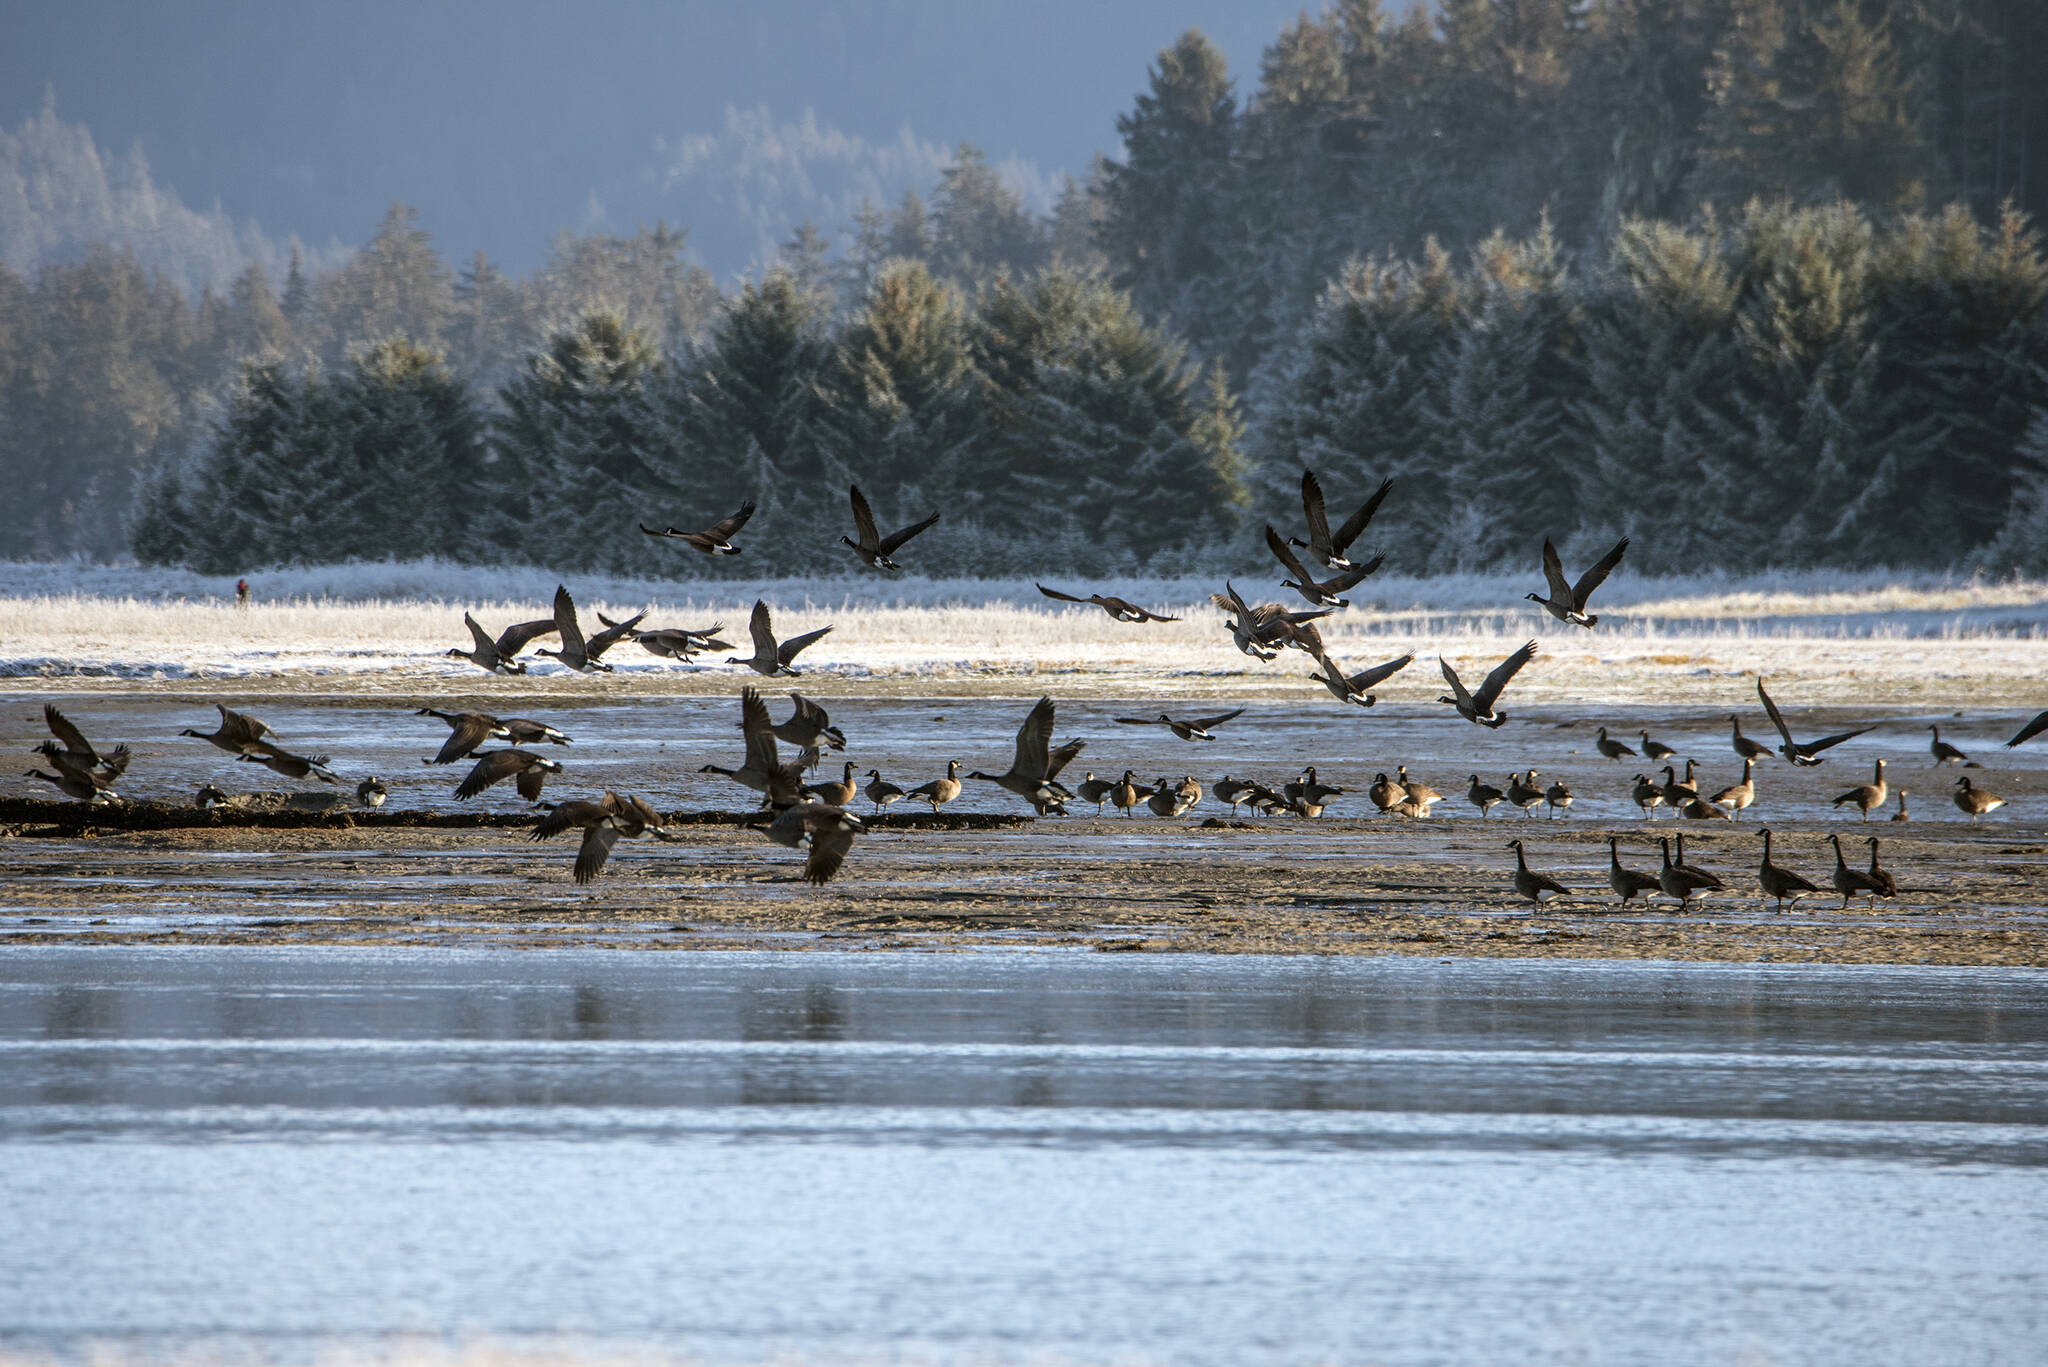 Small group of Canada geese take flight from sandbank on the Mendenhall River on Nov. 17. (Courtesy Photo / Kenneth Gill, gillfoto)